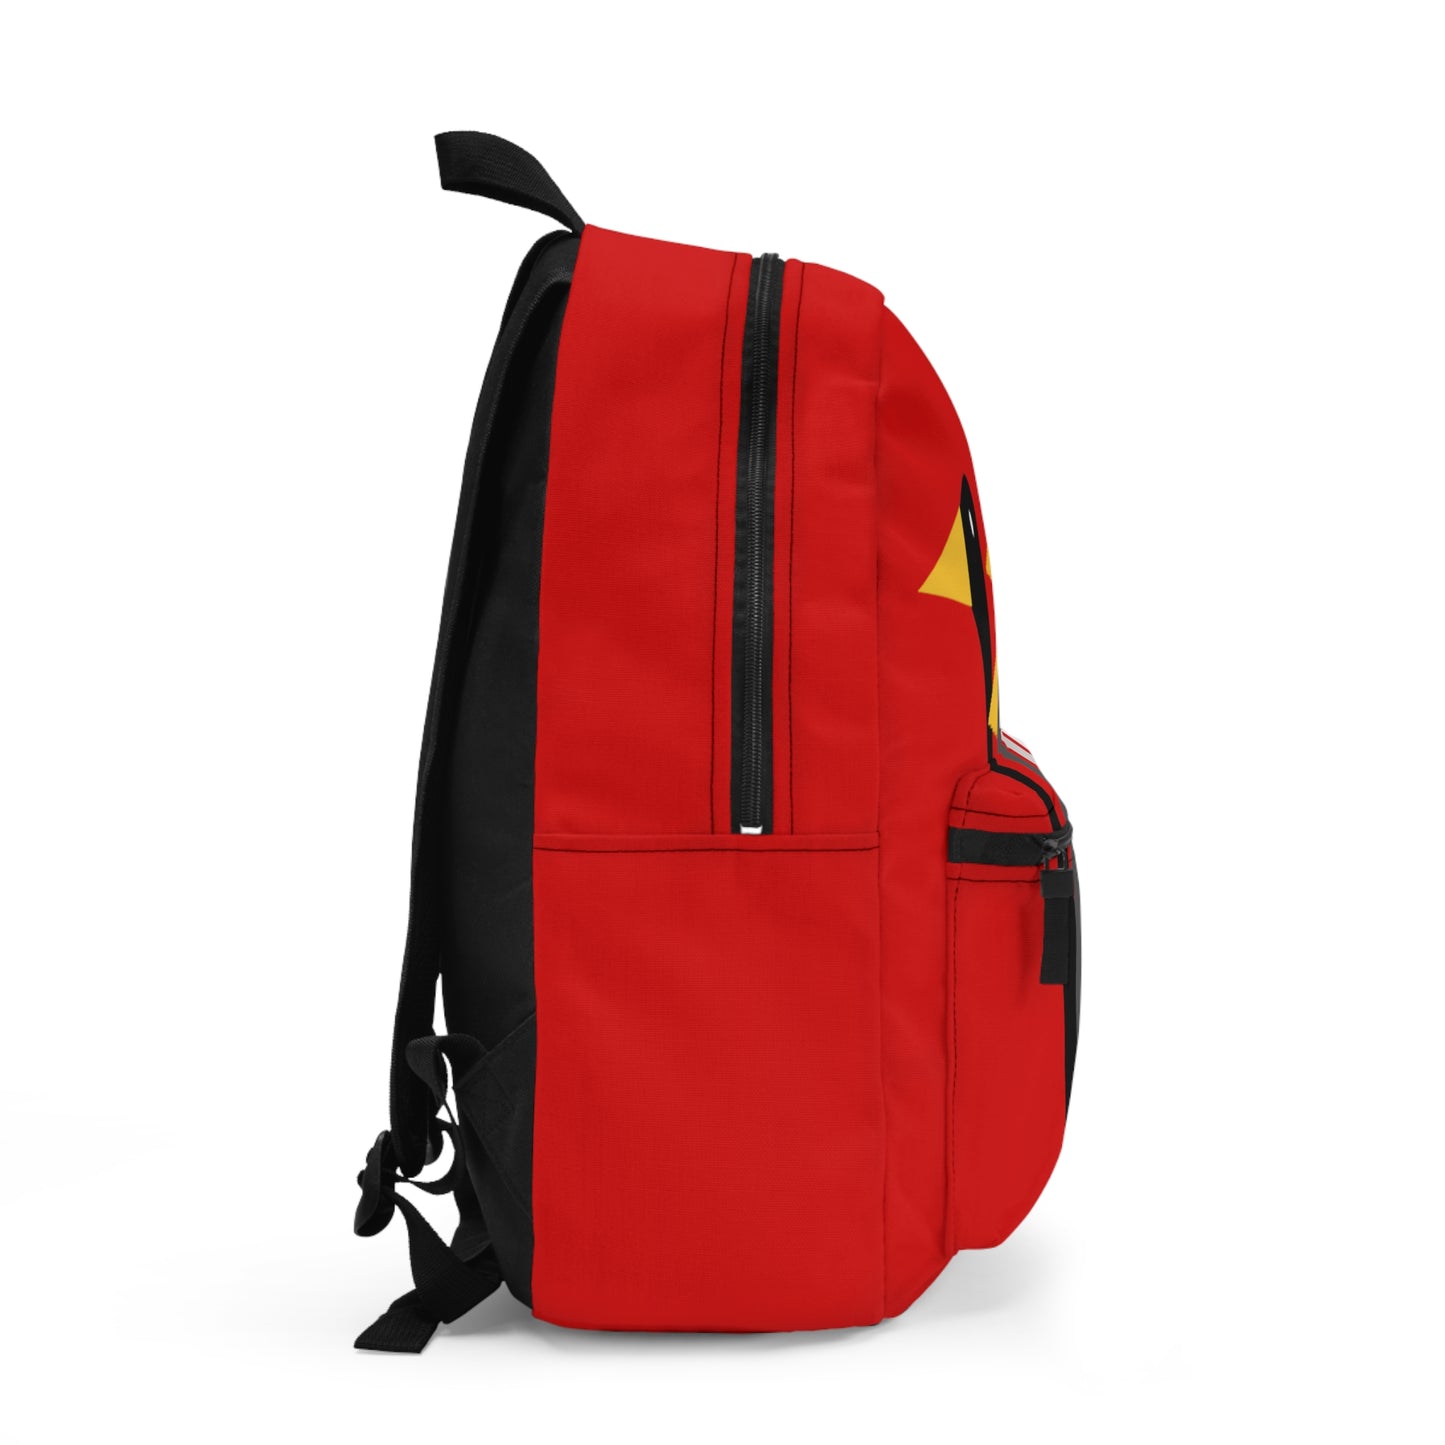 Bring the Ducks with you - Scarlet de0000 - Backpack